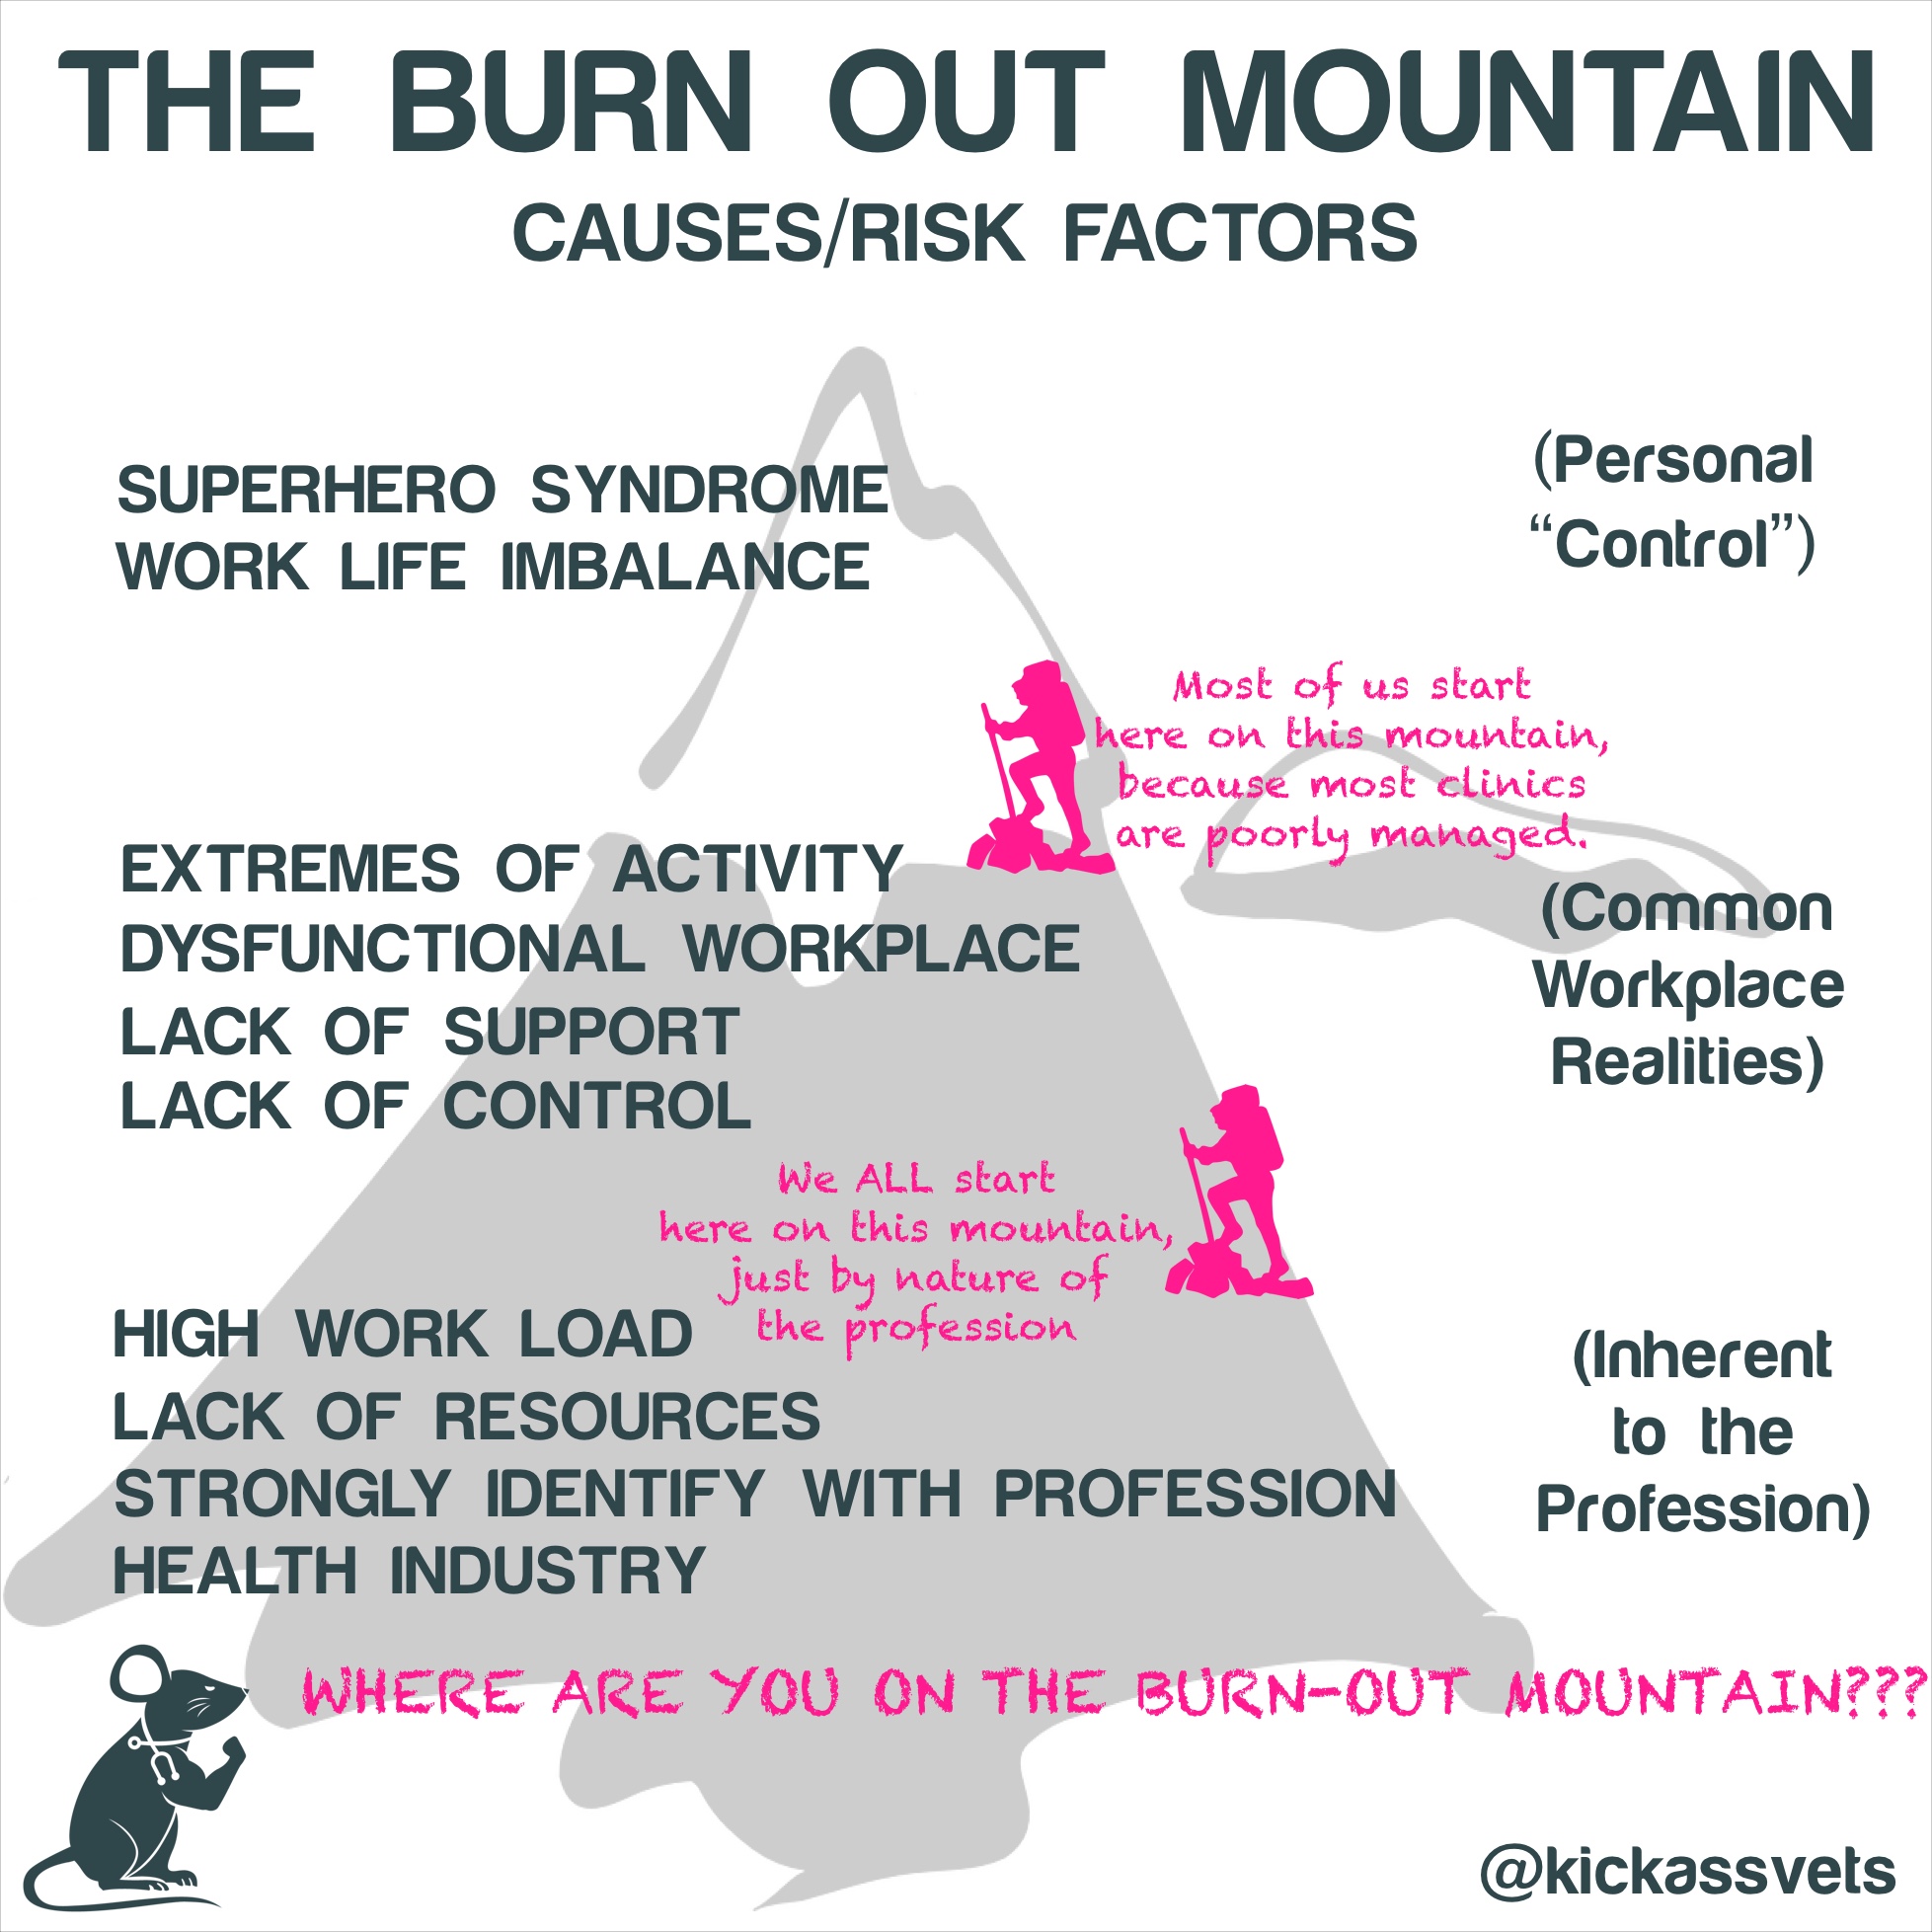 Depiction of the mountain of burnout, with all the risk factors showing that veterinary professionals are pre-disposed, by nature of our jobs, to burn out.